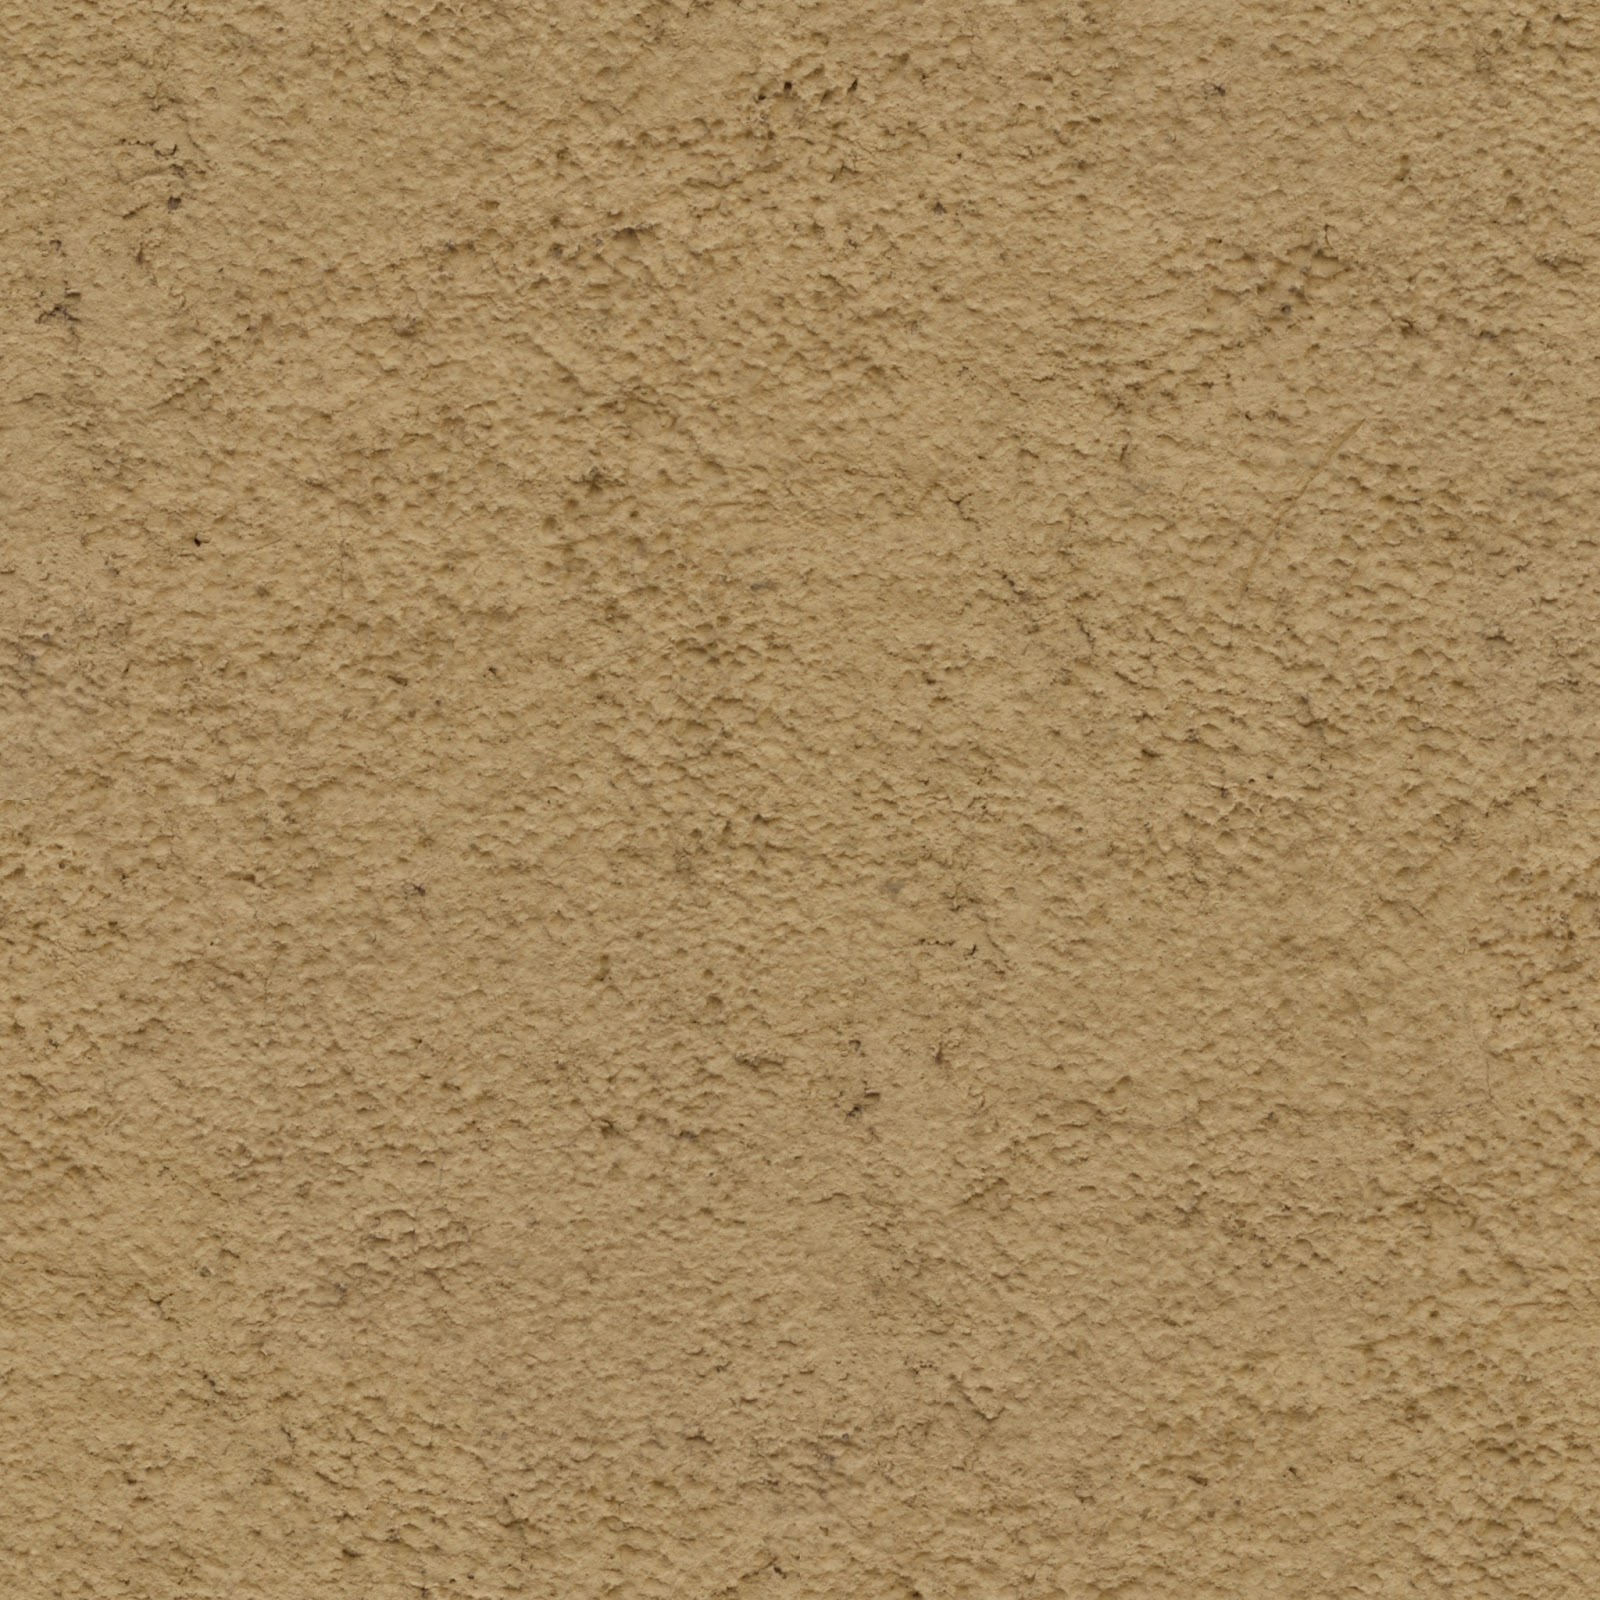 Stucco dirty rough stucco plaster wall paper seamless texture 7